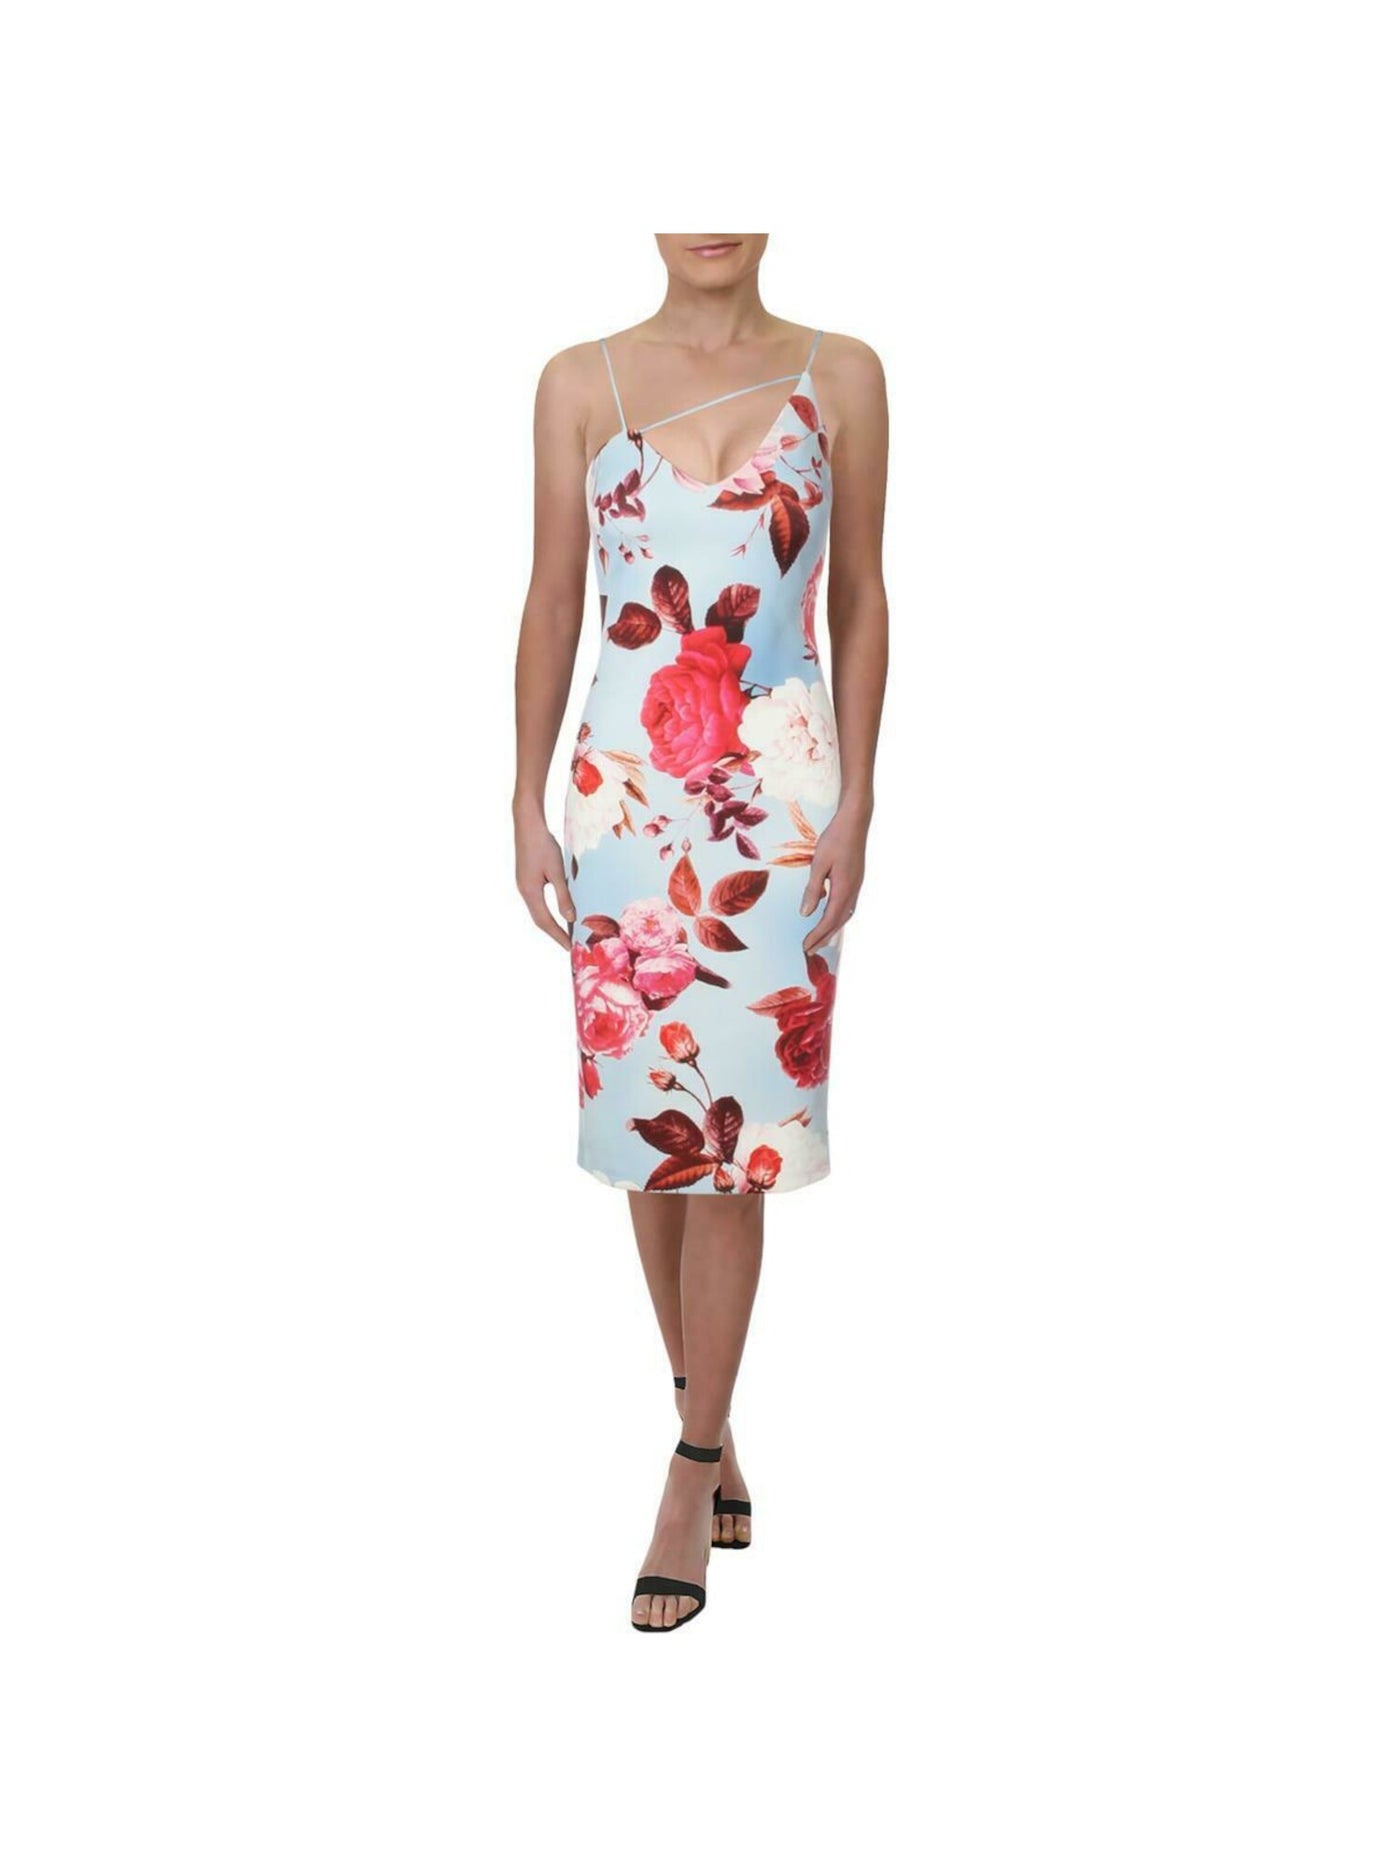 MARCIANO Womens Light Blue Zippered Floral Spaghetti Strap Below The Knee Party Sheath Dress XS